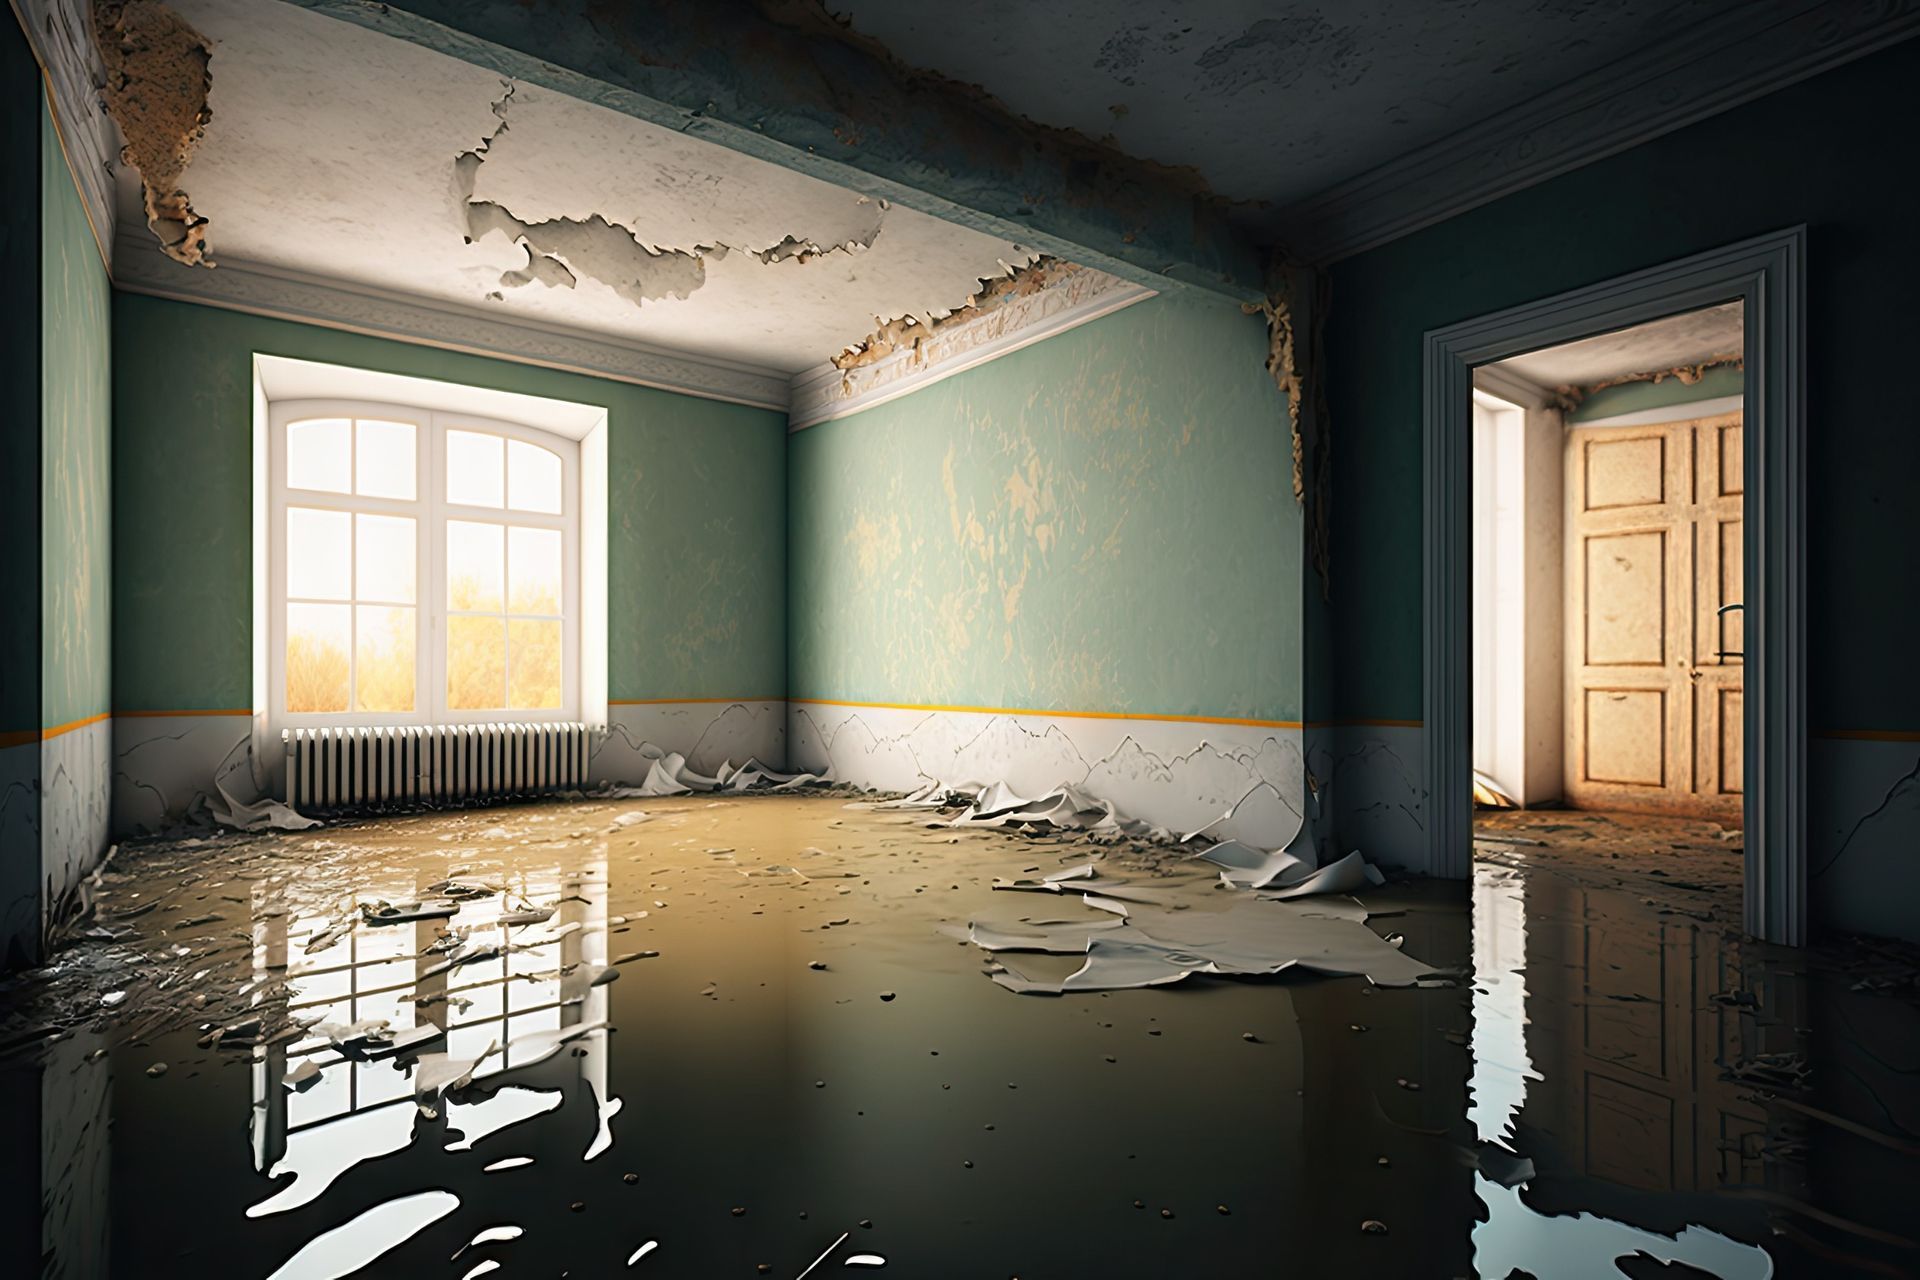 Steps to Take After Water Damage In Your Home